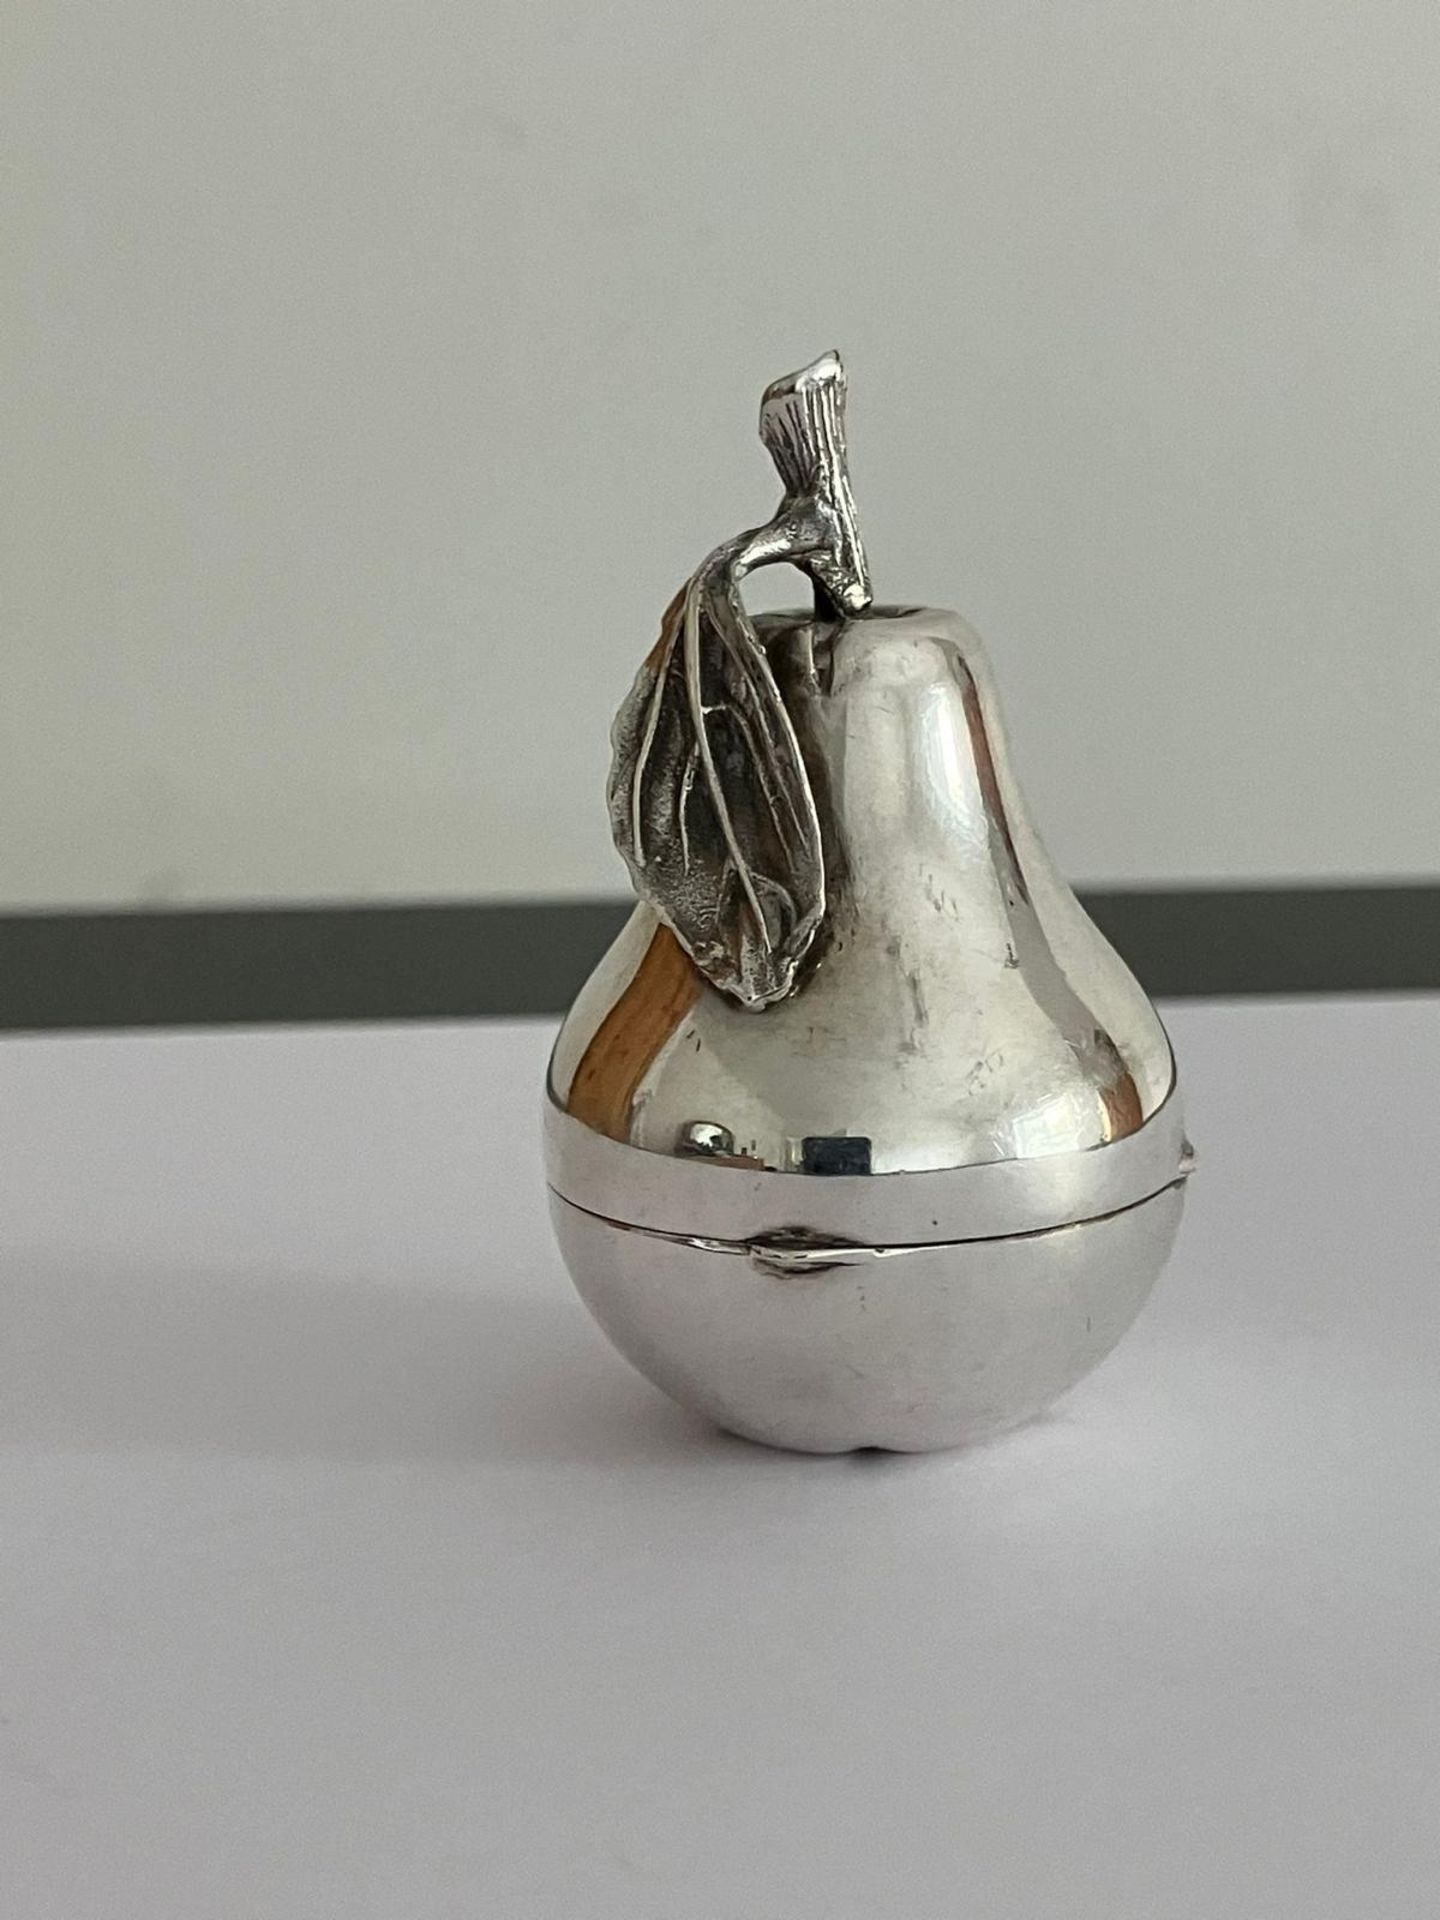 Unusual Vintage SILVER PILL BOX in the form of a PEAR. Hinge in perfect working order. Silver